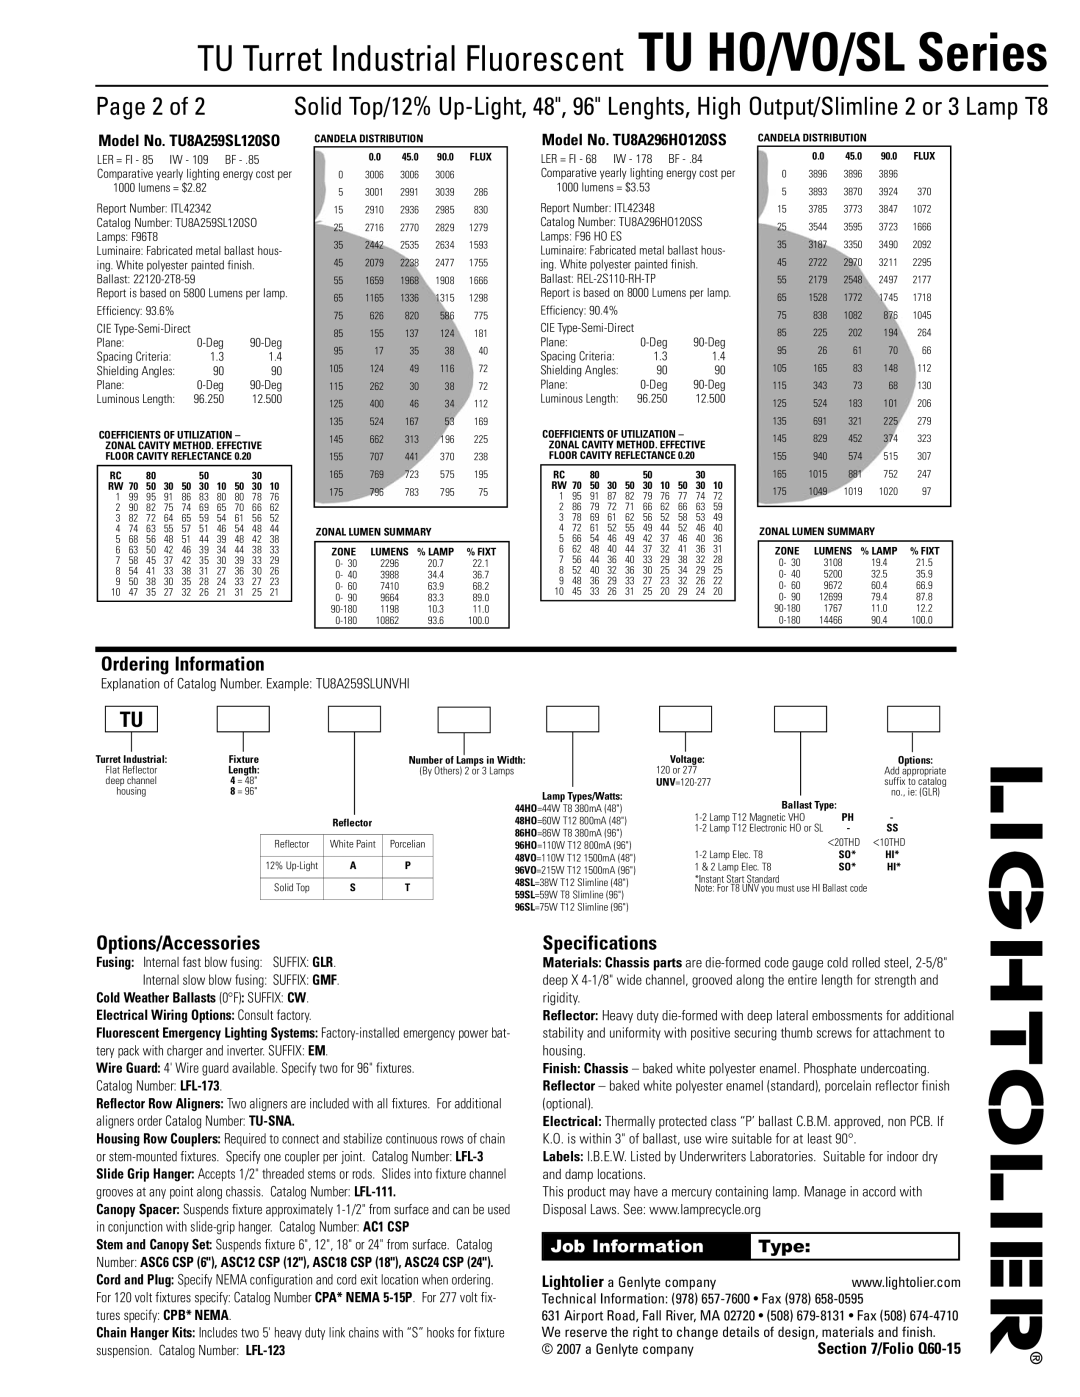 Lightolier TU SL Series Ordering Information, Options/Accessories, Specifications, Model No. TU8A259SL120SO, Page 2 of 